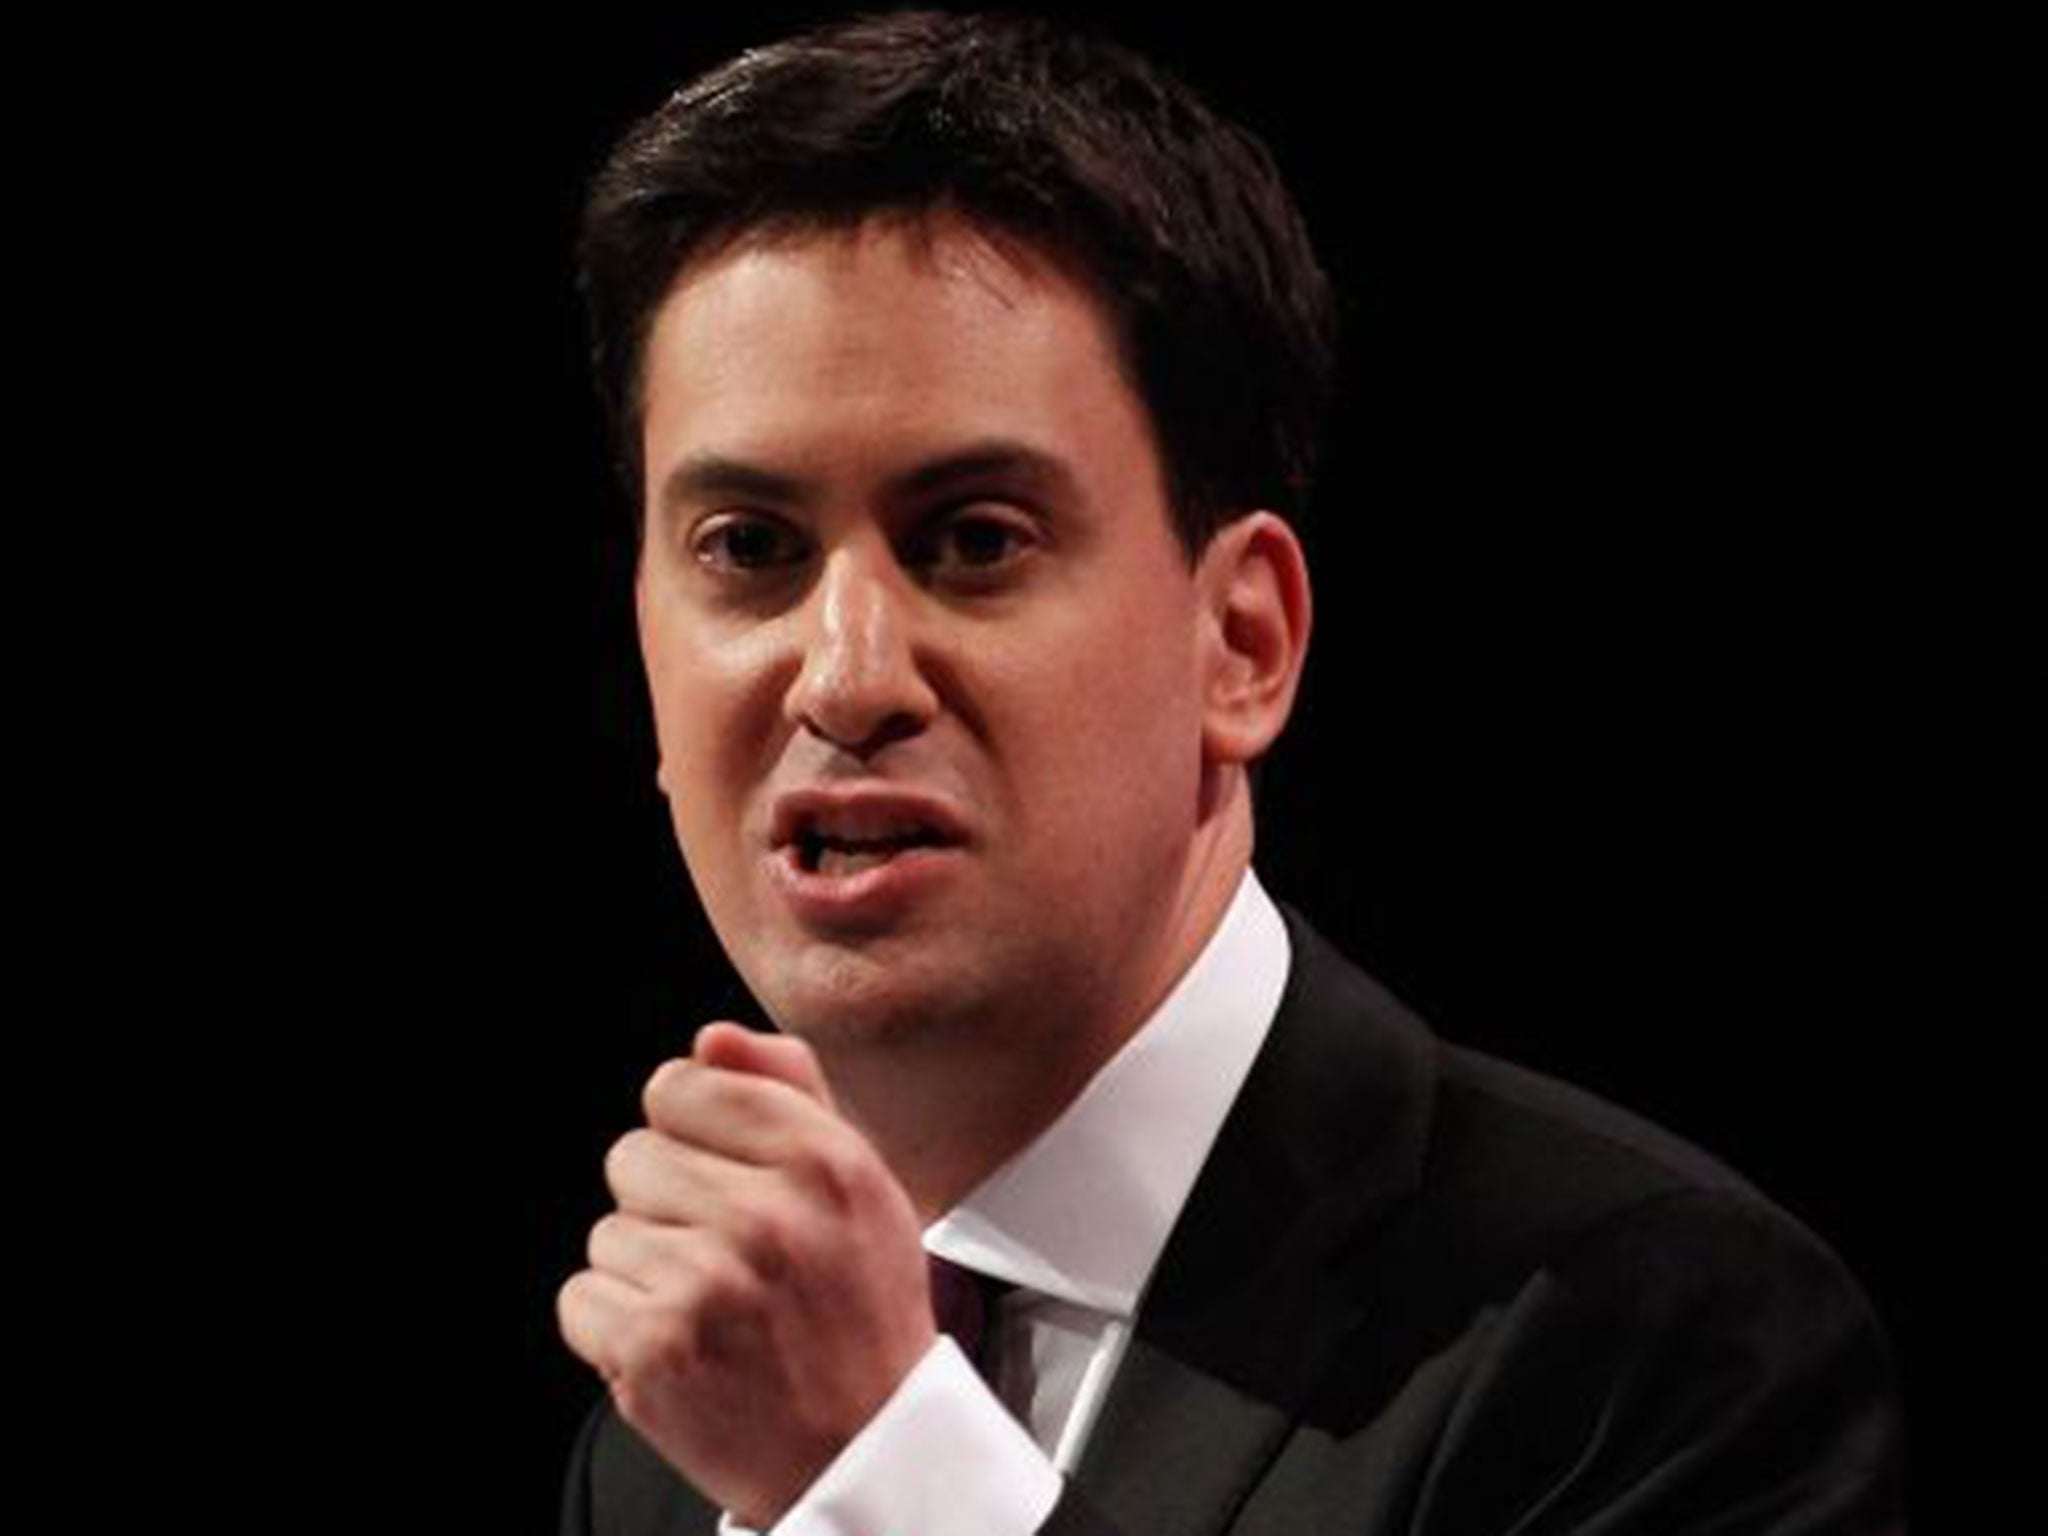 Ed Miliband insists Labour is on course for victory at next May's general election despite its near-disaster in last Thursday's by-election in Heywood and Middleton